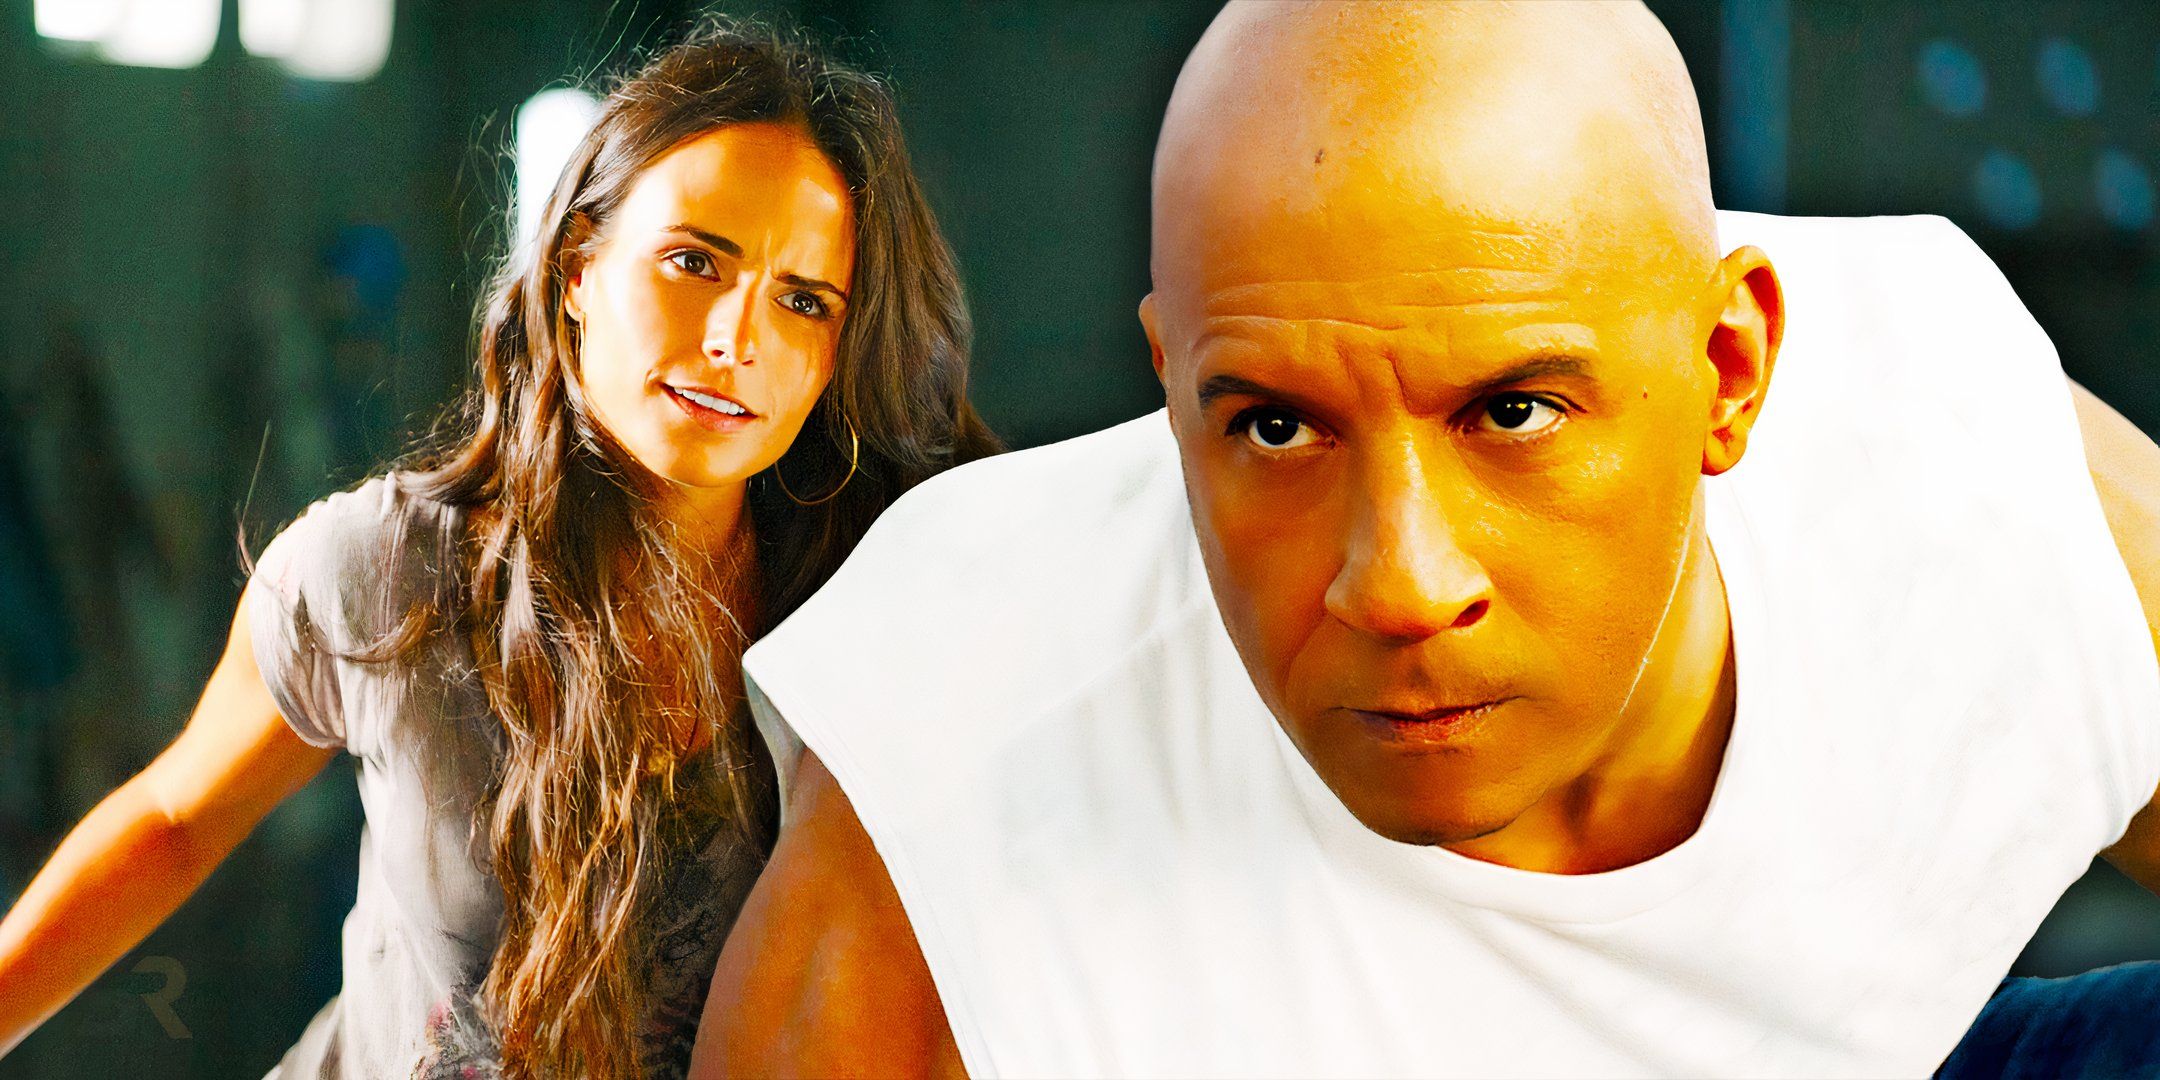 8 Lessons Fast 11 Can Learn From Fast & Furious’ Best Movie